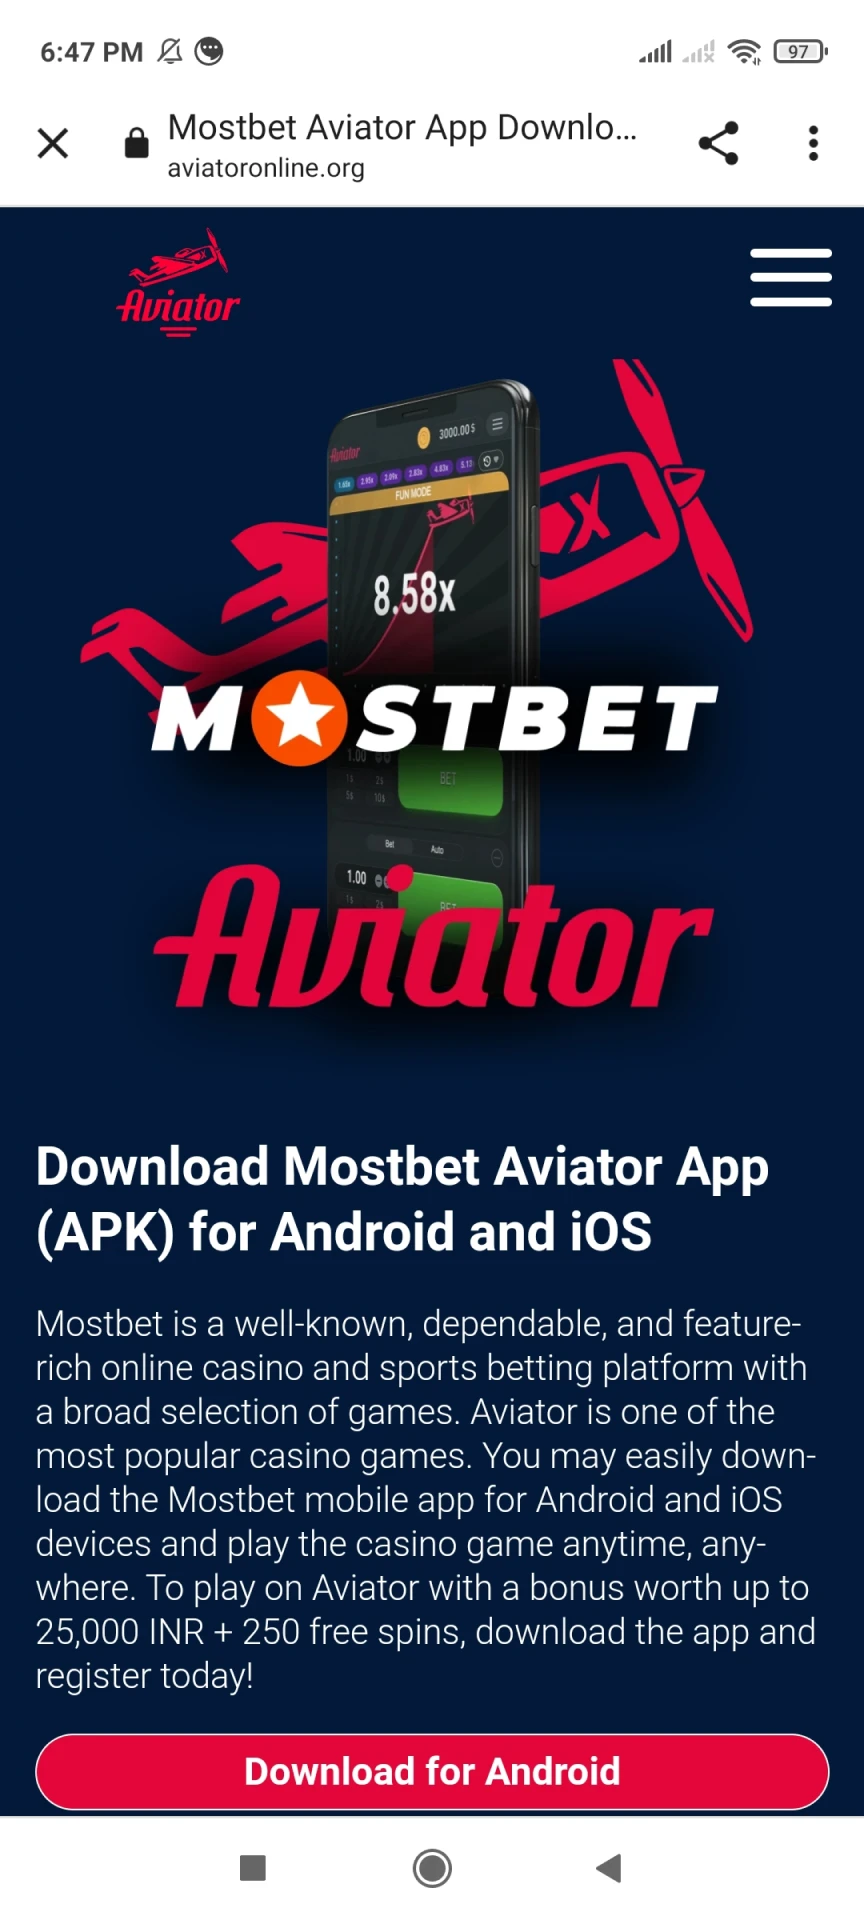 Follow the link to download the Mostbet app.